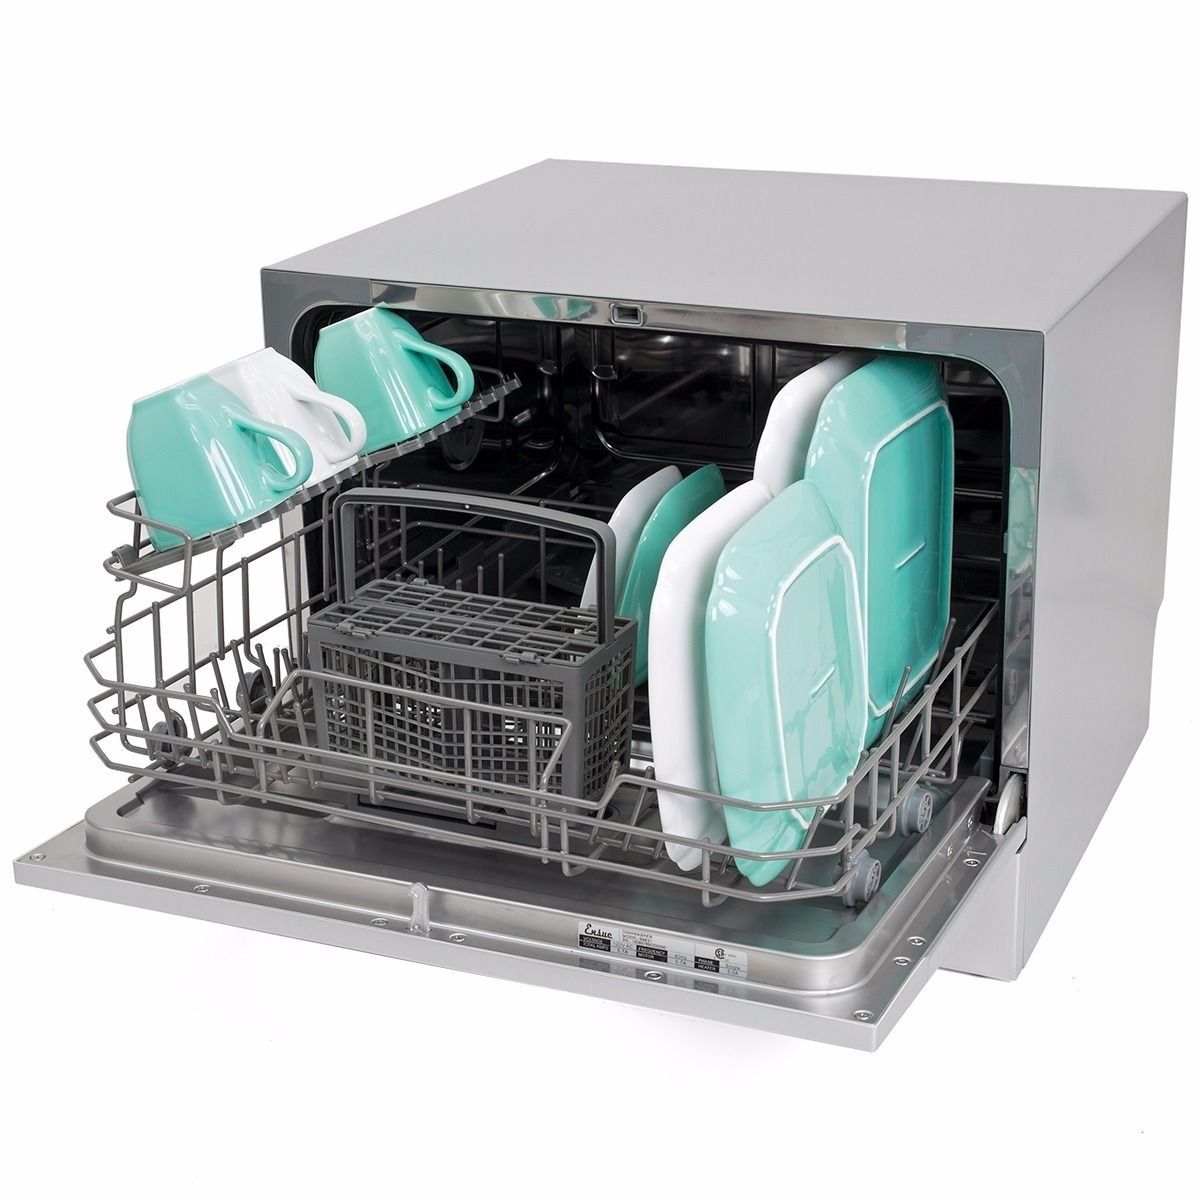 Ensue Countertop Dishwasher Energy Star Certified 6-Place 6-Program Setting, Silver - image 3 of 7